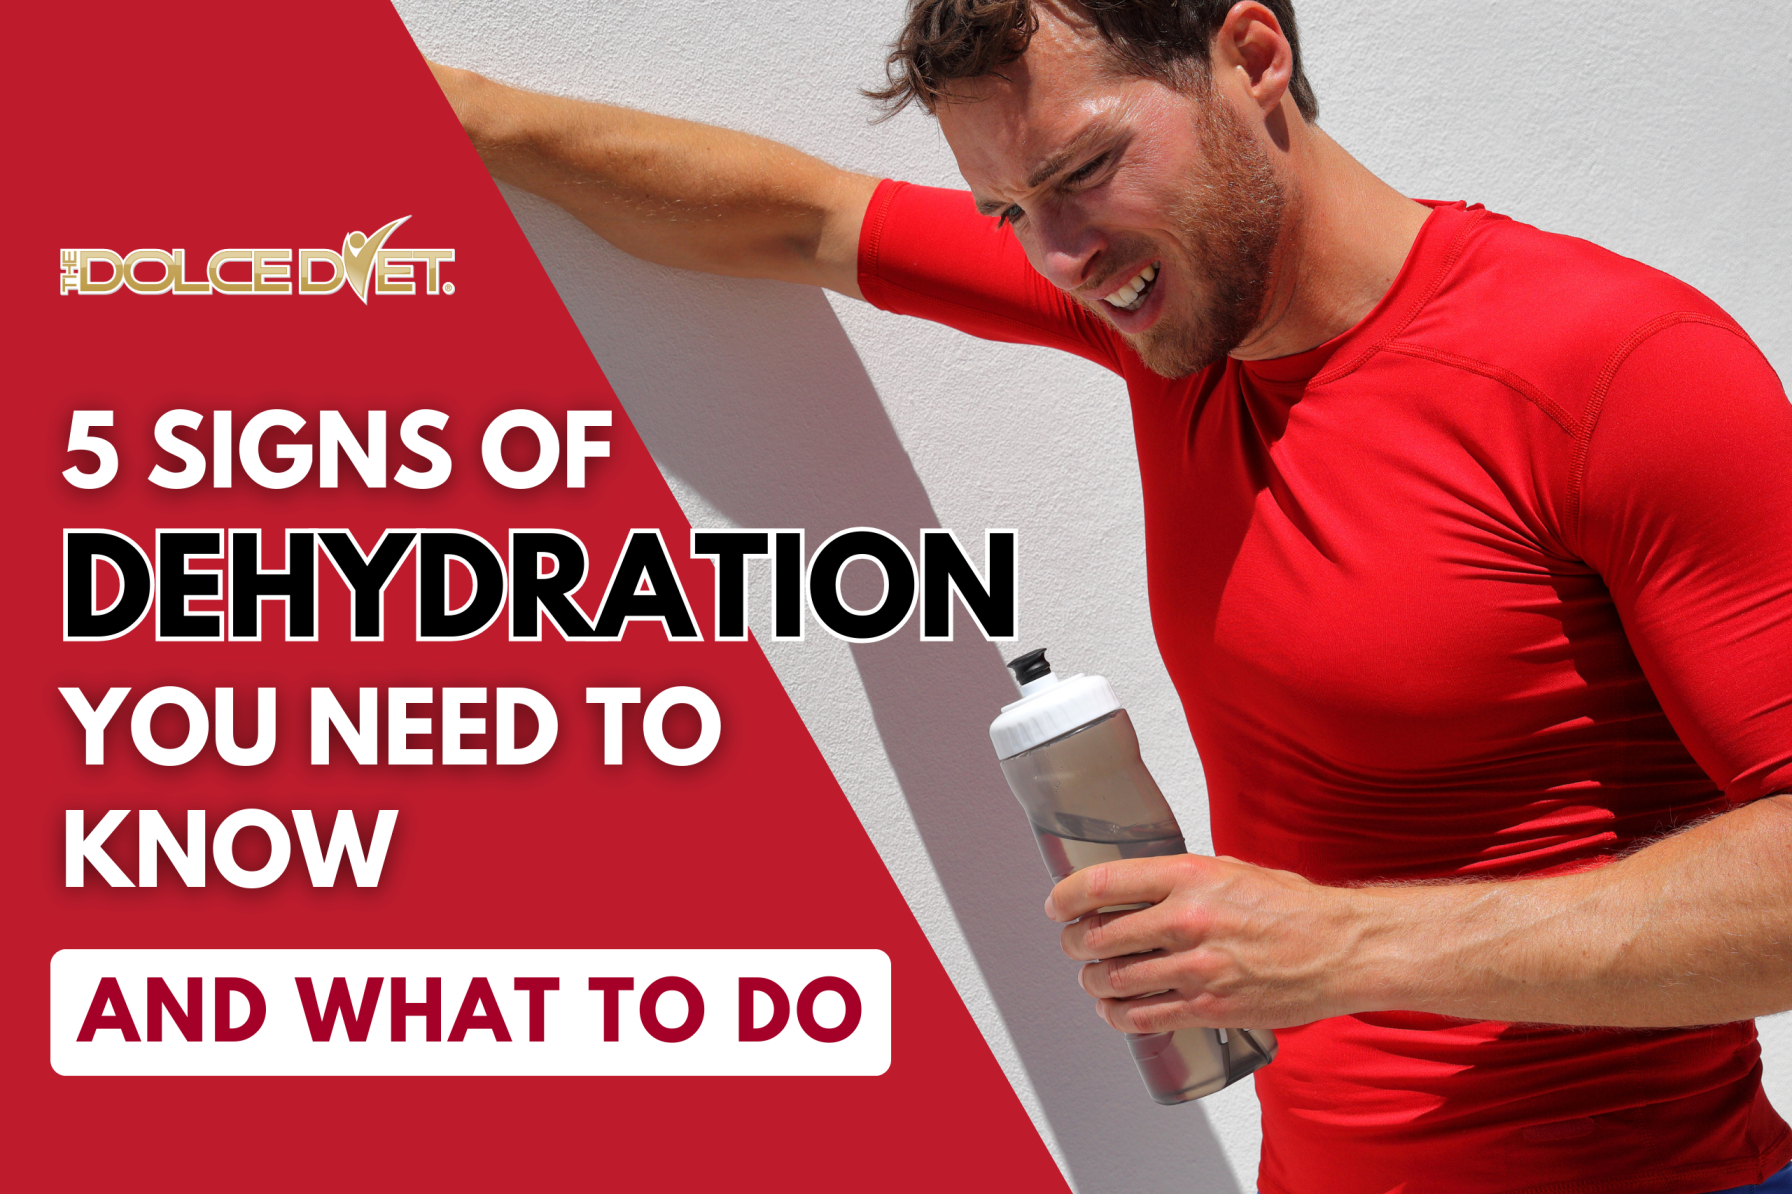 5 Signs Of Dehydration You Need To Know (And What To Do)